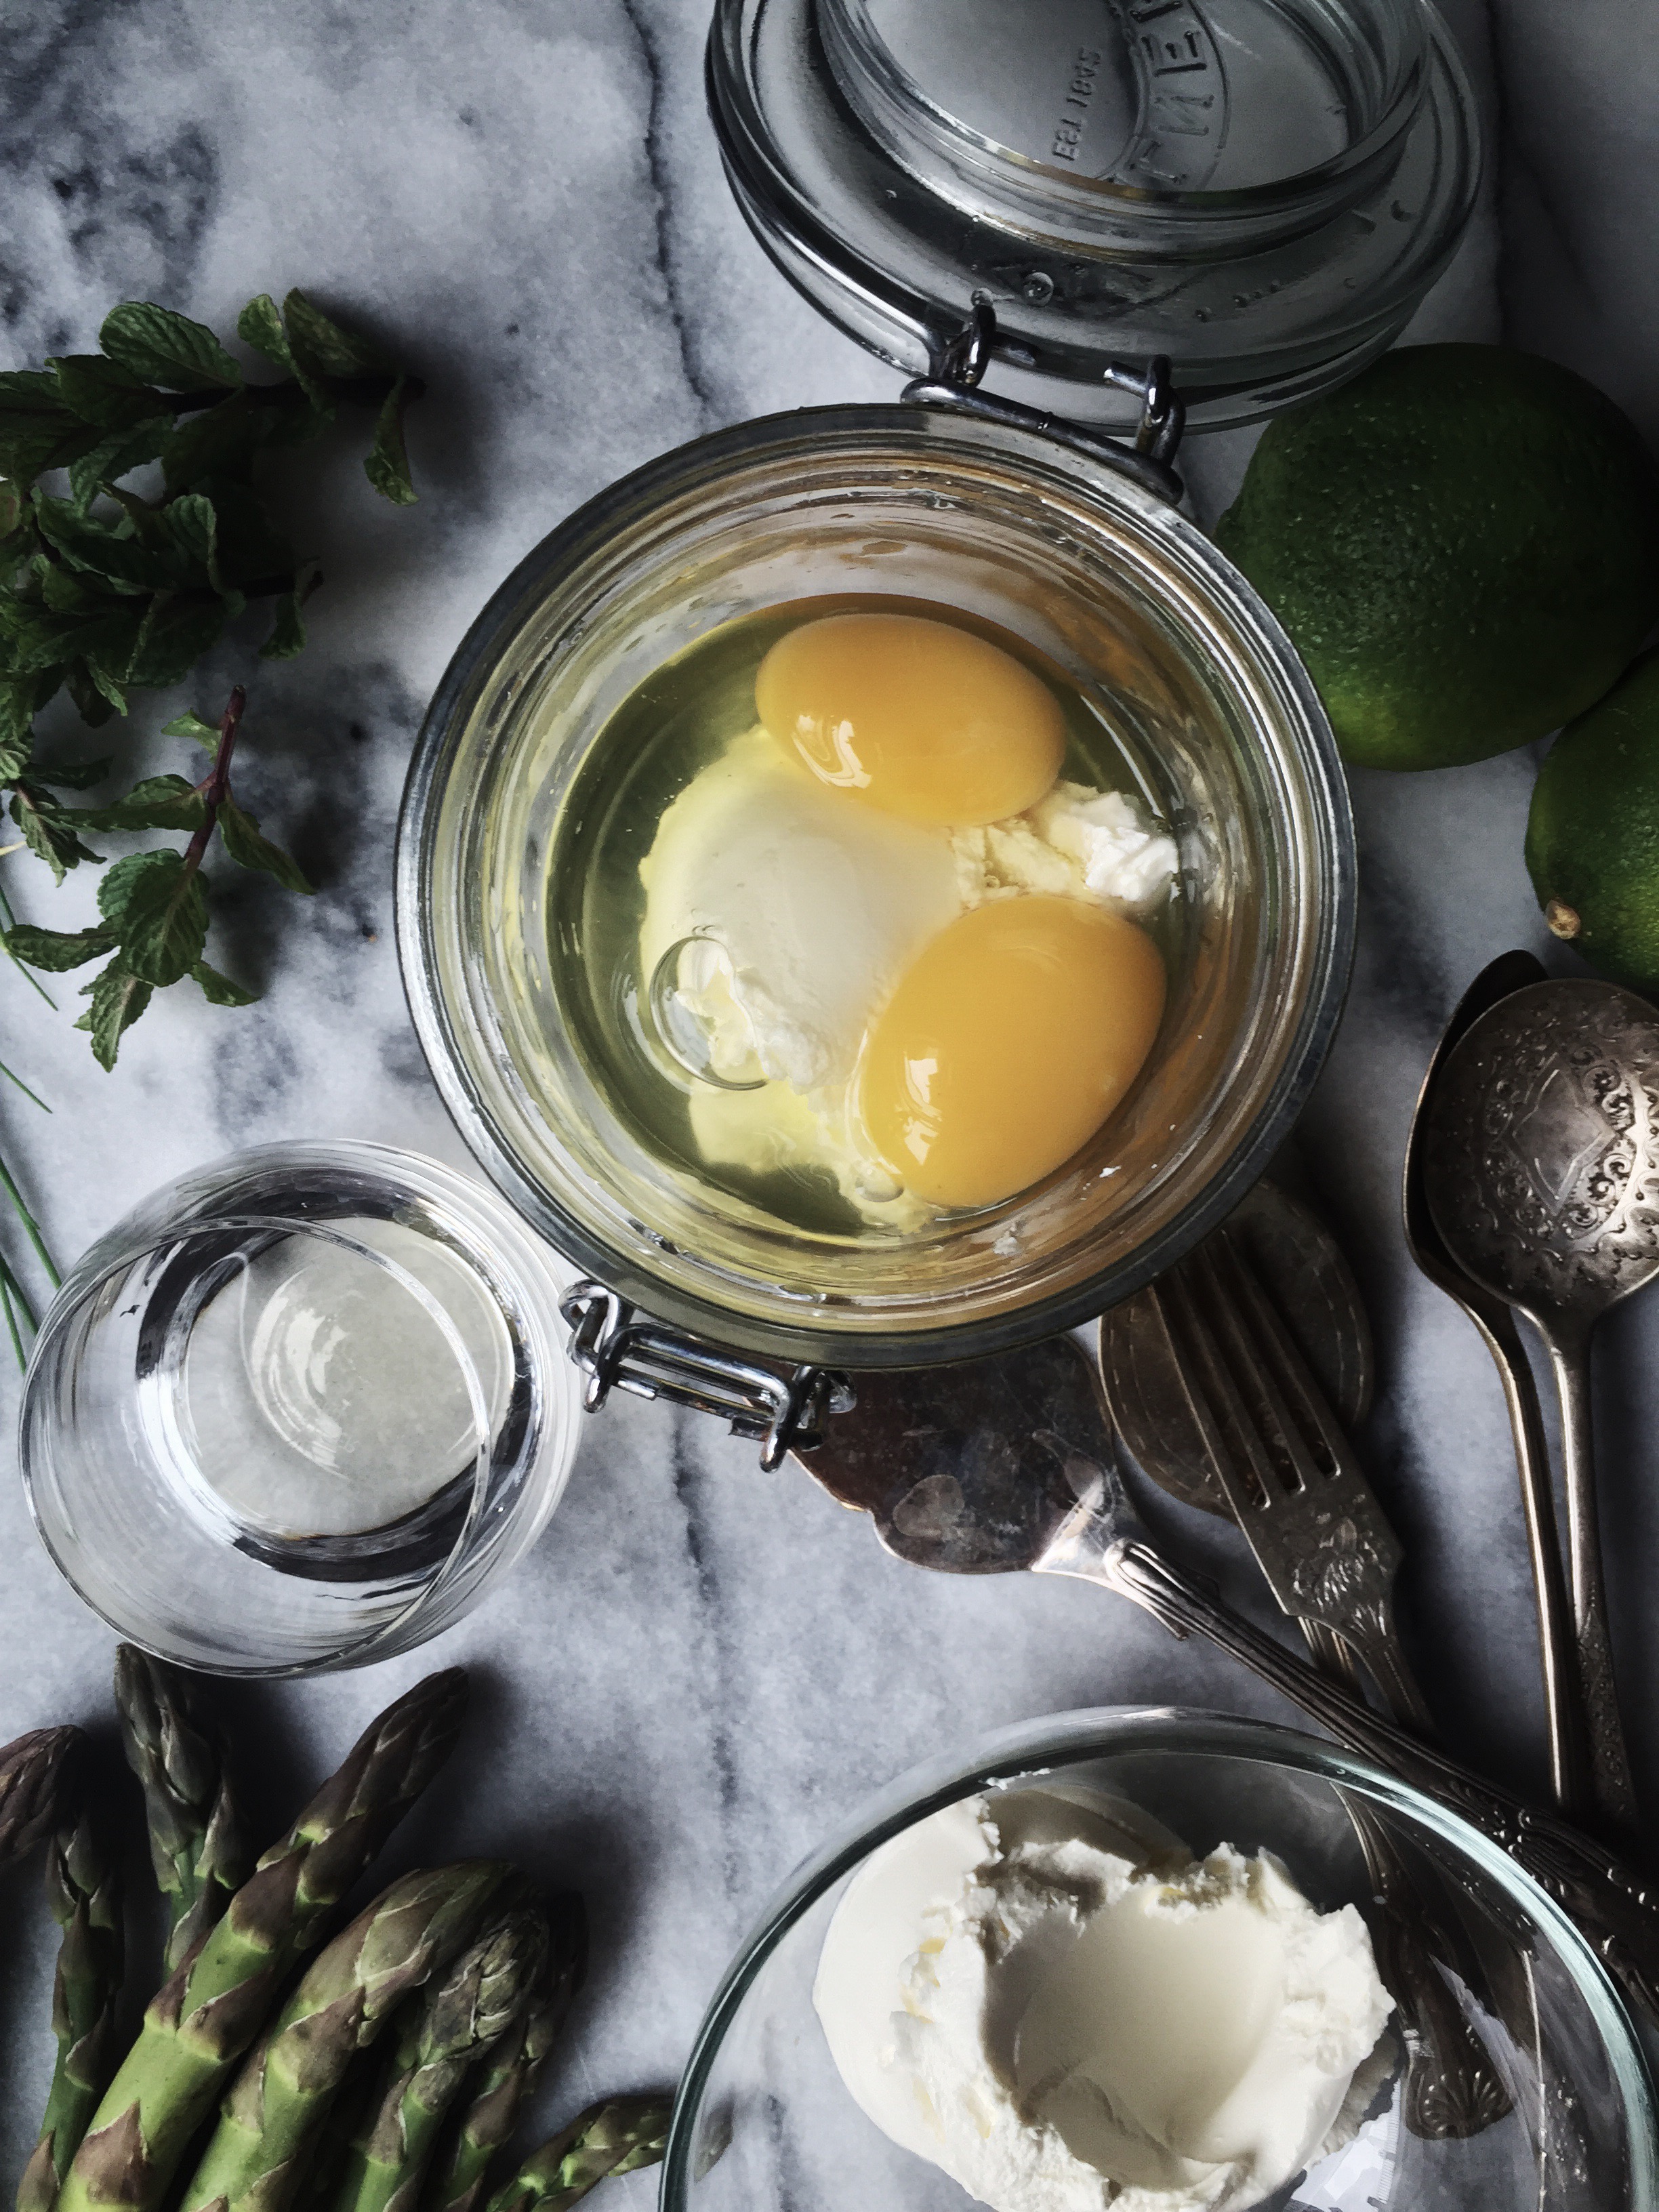 Eggs en cocotte, cooked in a jar, with asparagus and heavy cream